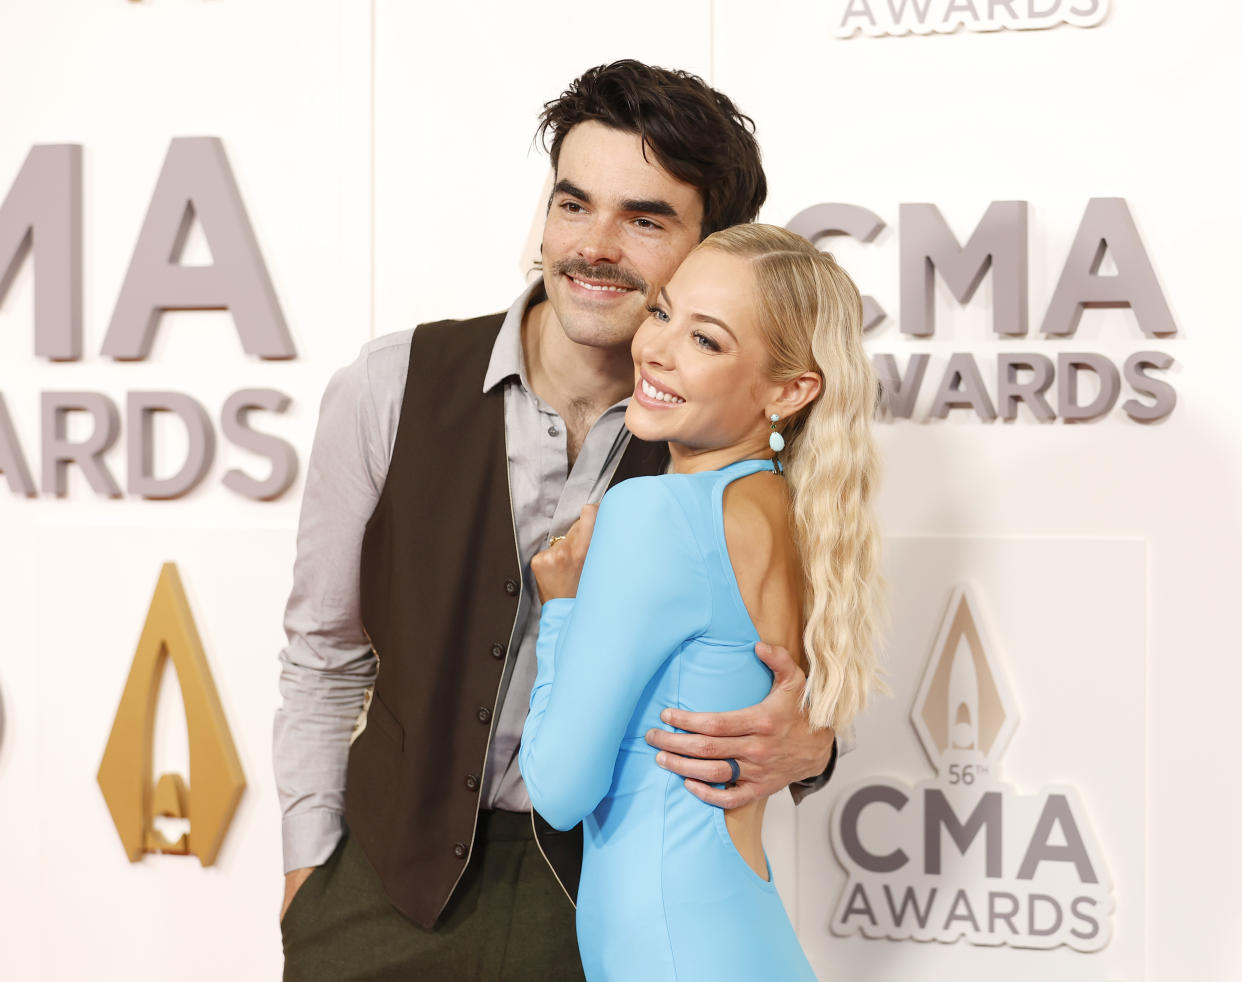 NASHVILLE, TENNESSEE - NOVEMBER 09: Jake Etheridge and MacKenzie Porter attends The 56th Annual CMA Awards at Bridgestone Arena on November 09, 2022 in Nashville, Tennessee. (Photo by Jason Kempin/Getty Images)